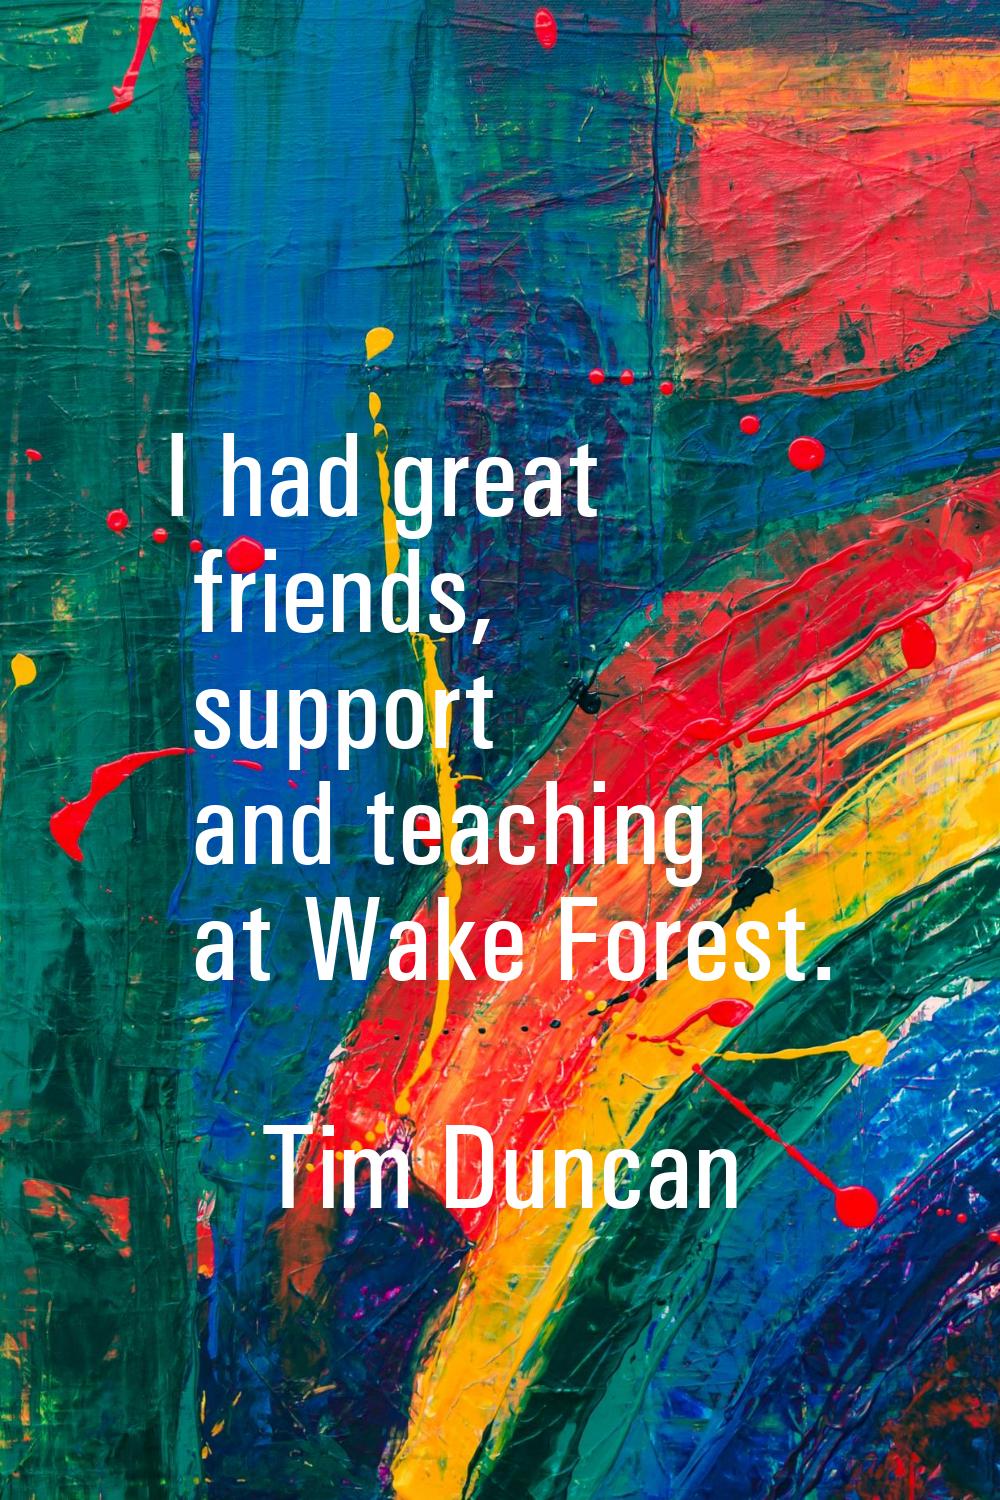 I had great friends, support and teaching at Wake Forest.